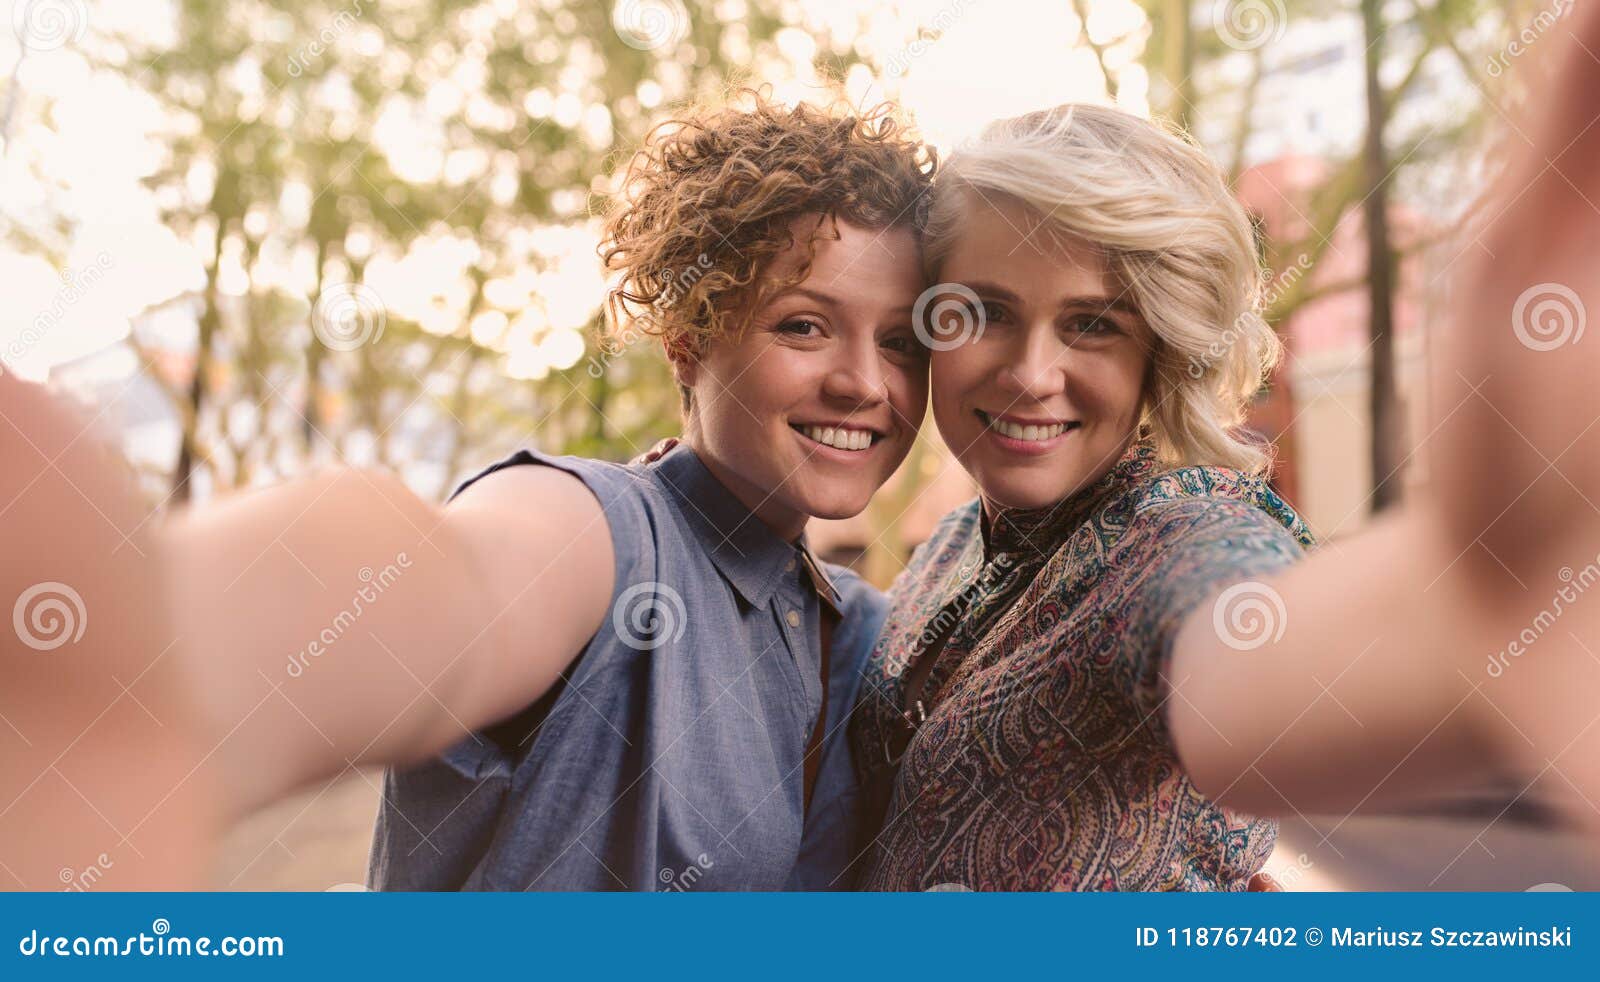 Smiling Lesbian Couple Standing Together In The City